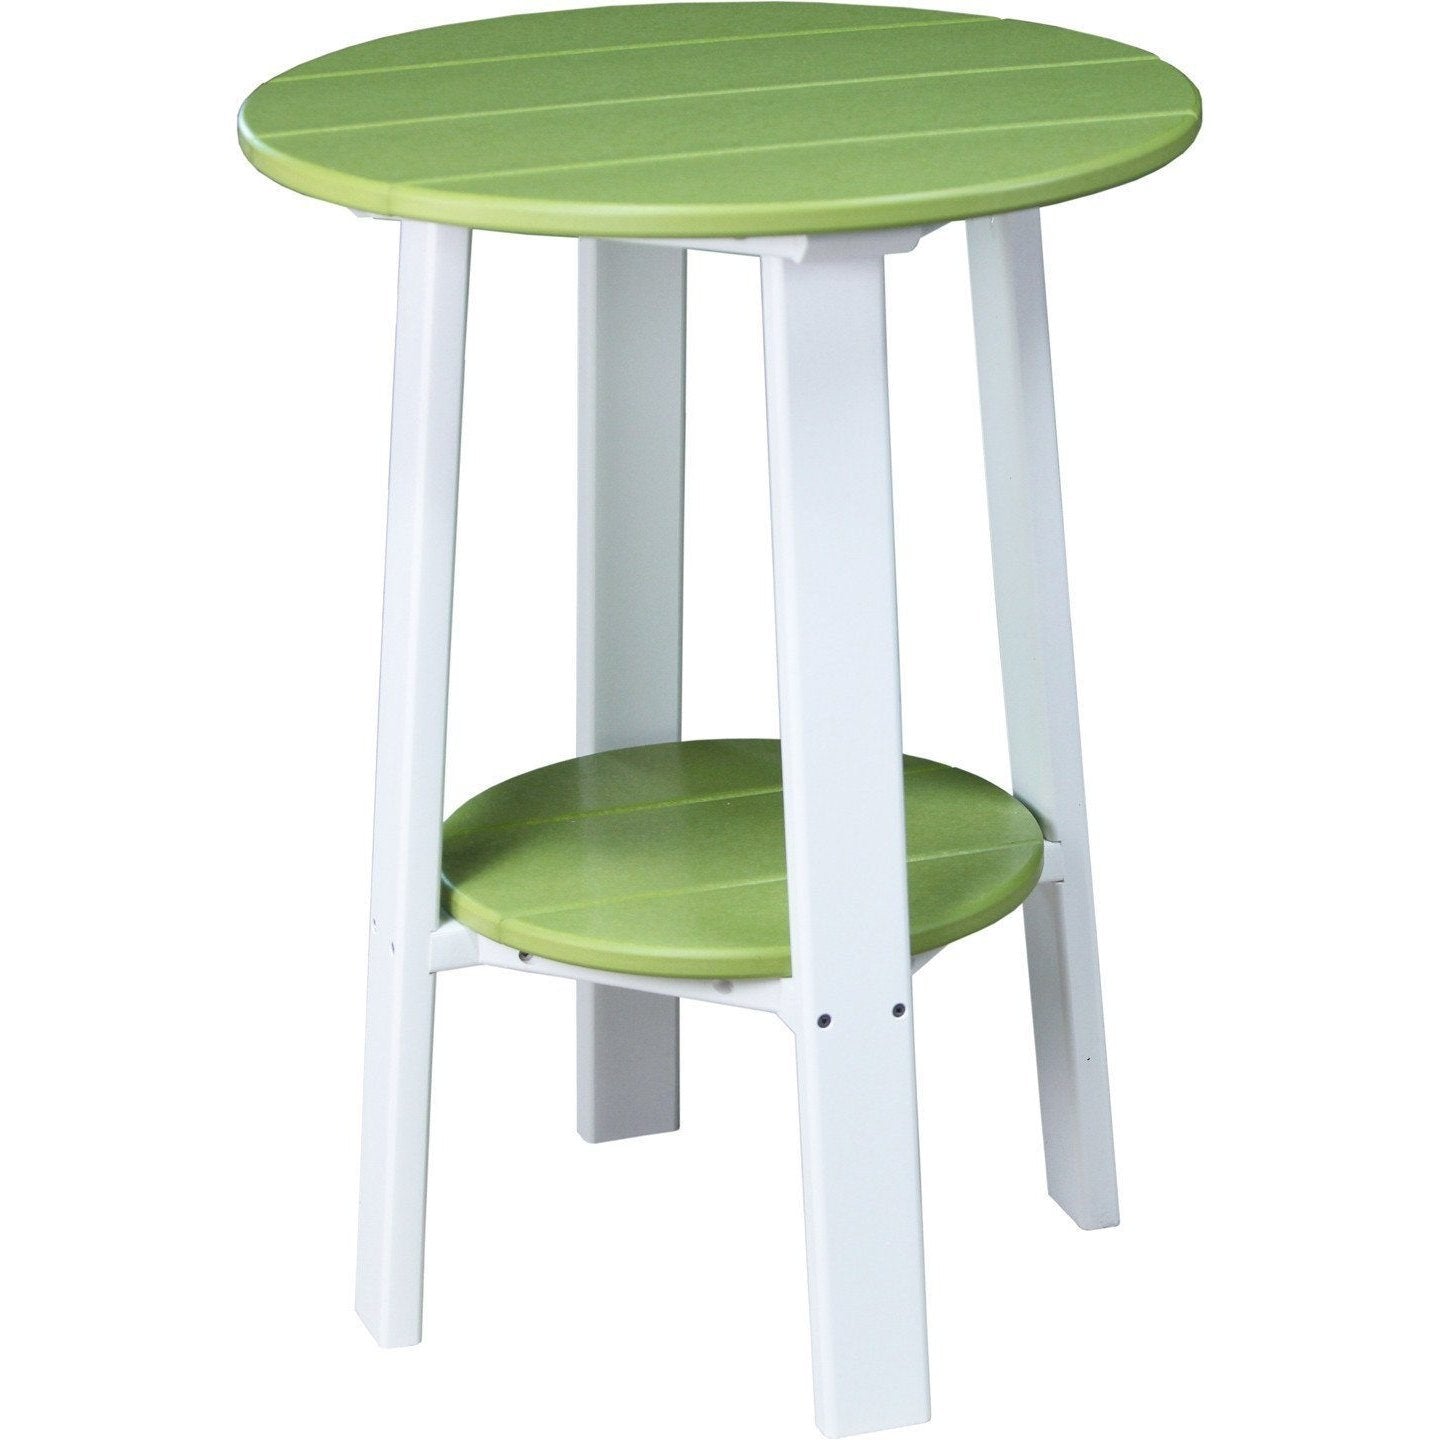 Outdoor 28" Deluxe End Table   Lime Green & White